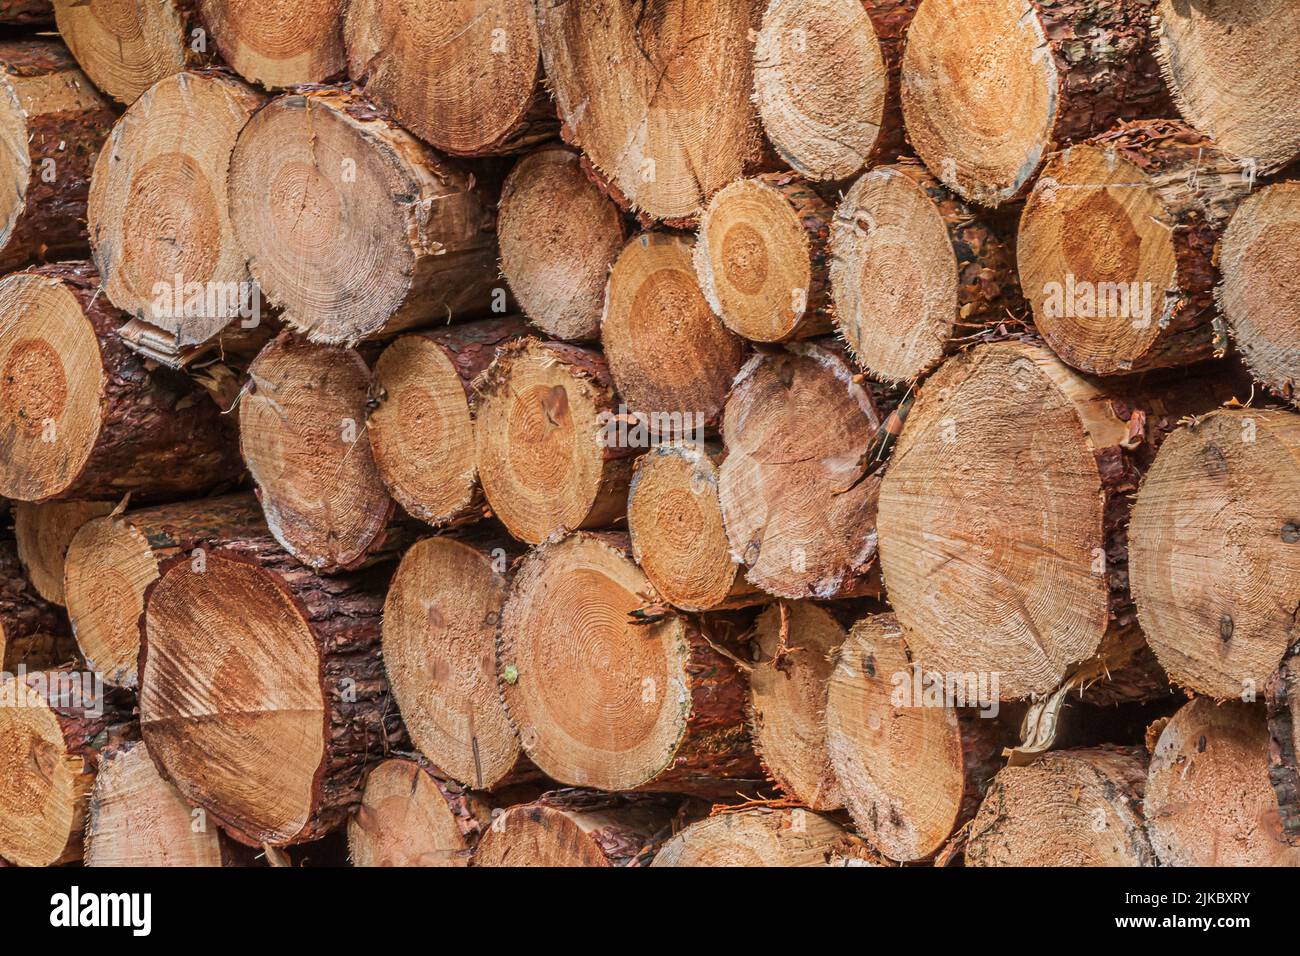 Ends of sawn tree trunks. Pile of felled trees. side view of several sawn pine logs with bark in a pile after harvesting in the forest. Annual rings Stock Photo